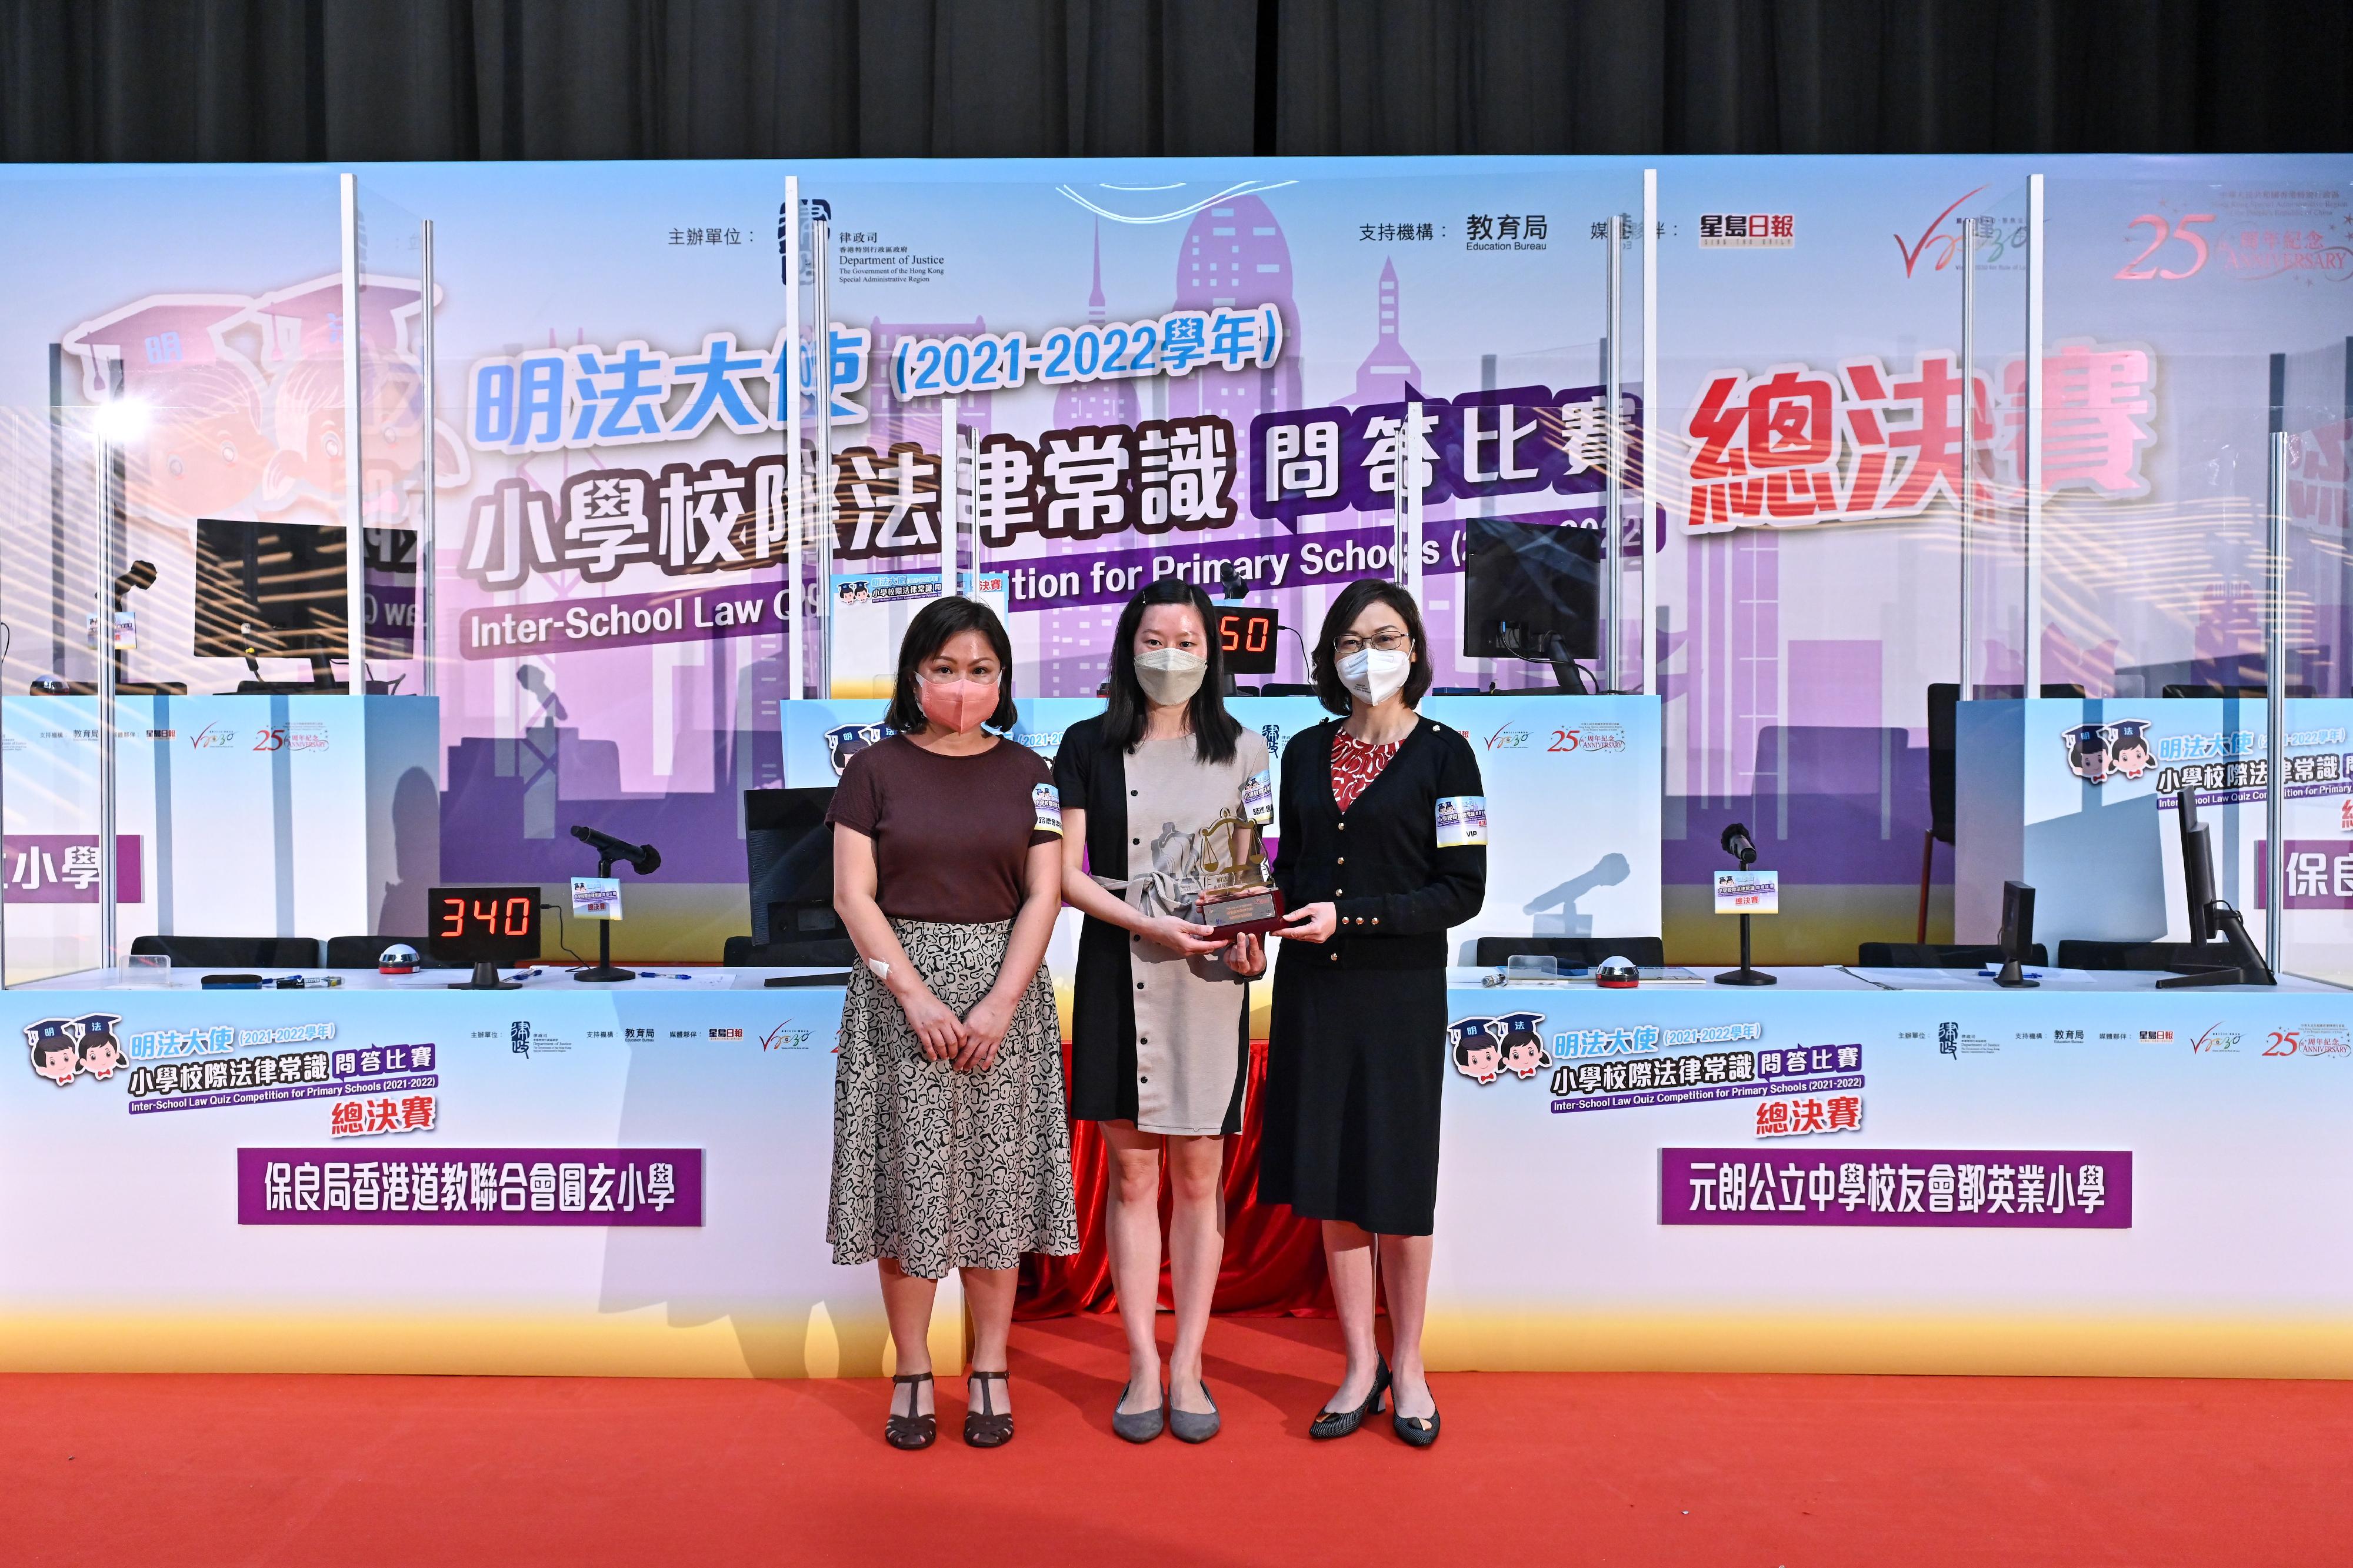 The Grand Final of the Inter-School Law Quiz Competition for primary school students, organised by the Department of Justice (DoJ) and supported by the Education Bureau, was successfully held today (June 27) at the M+ museum. Photo shows the Deputy Principal Government Counsel of Inclusive Dispute Avoidance and Resolution Office of the DoJ, Ms Helen Kung (first right), presenting the best participation prize to Leung Kui Kau Lutheran Primary School.
